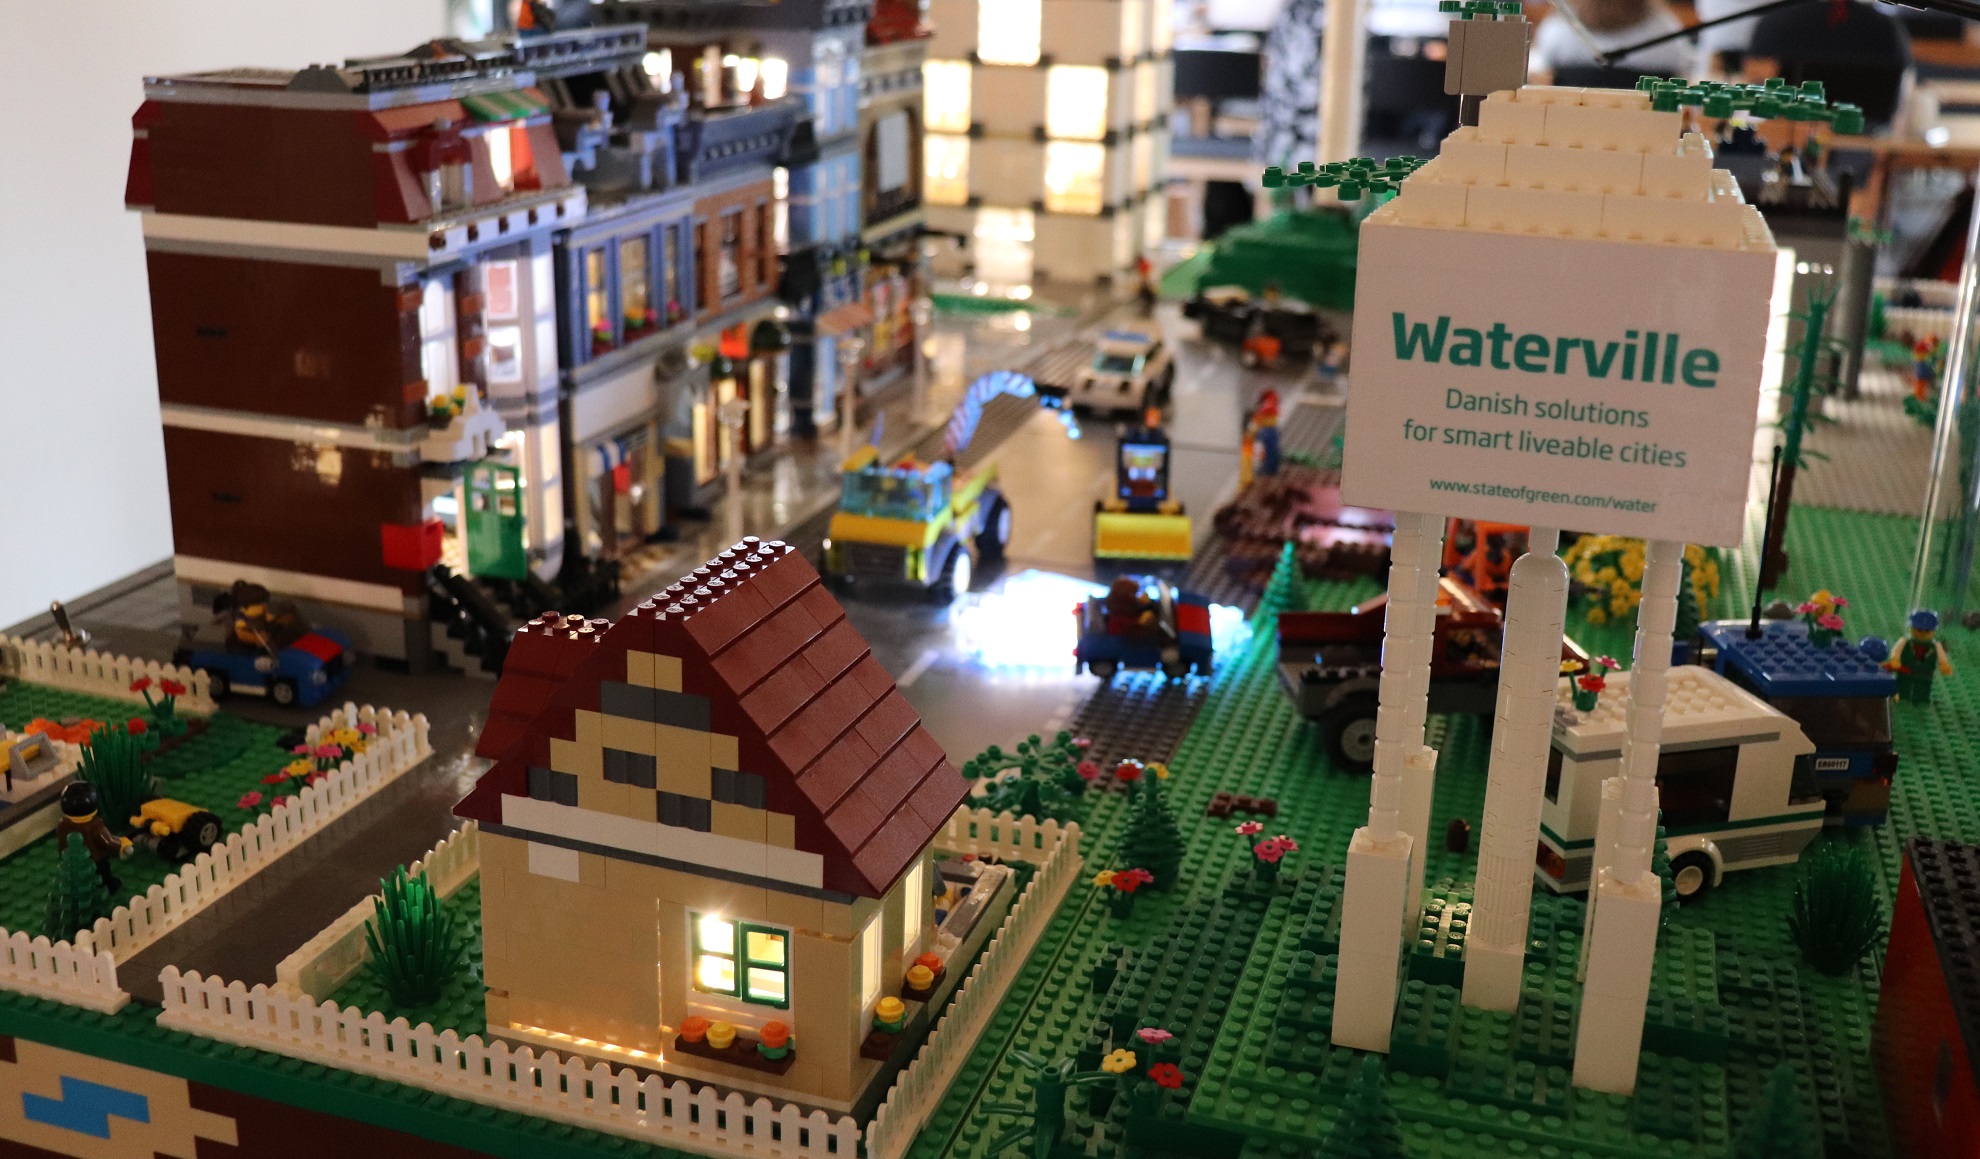 LEGO illustration of a smart and livable city